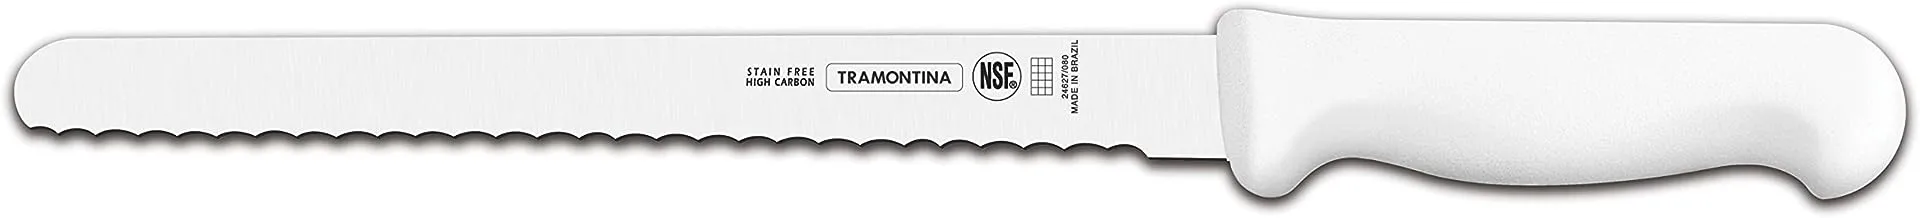 Tramontina Professional 10 Inches Cake/Bread Slicer with Serrated Edge Stainless Steel Blade and White Polypropylene Handle